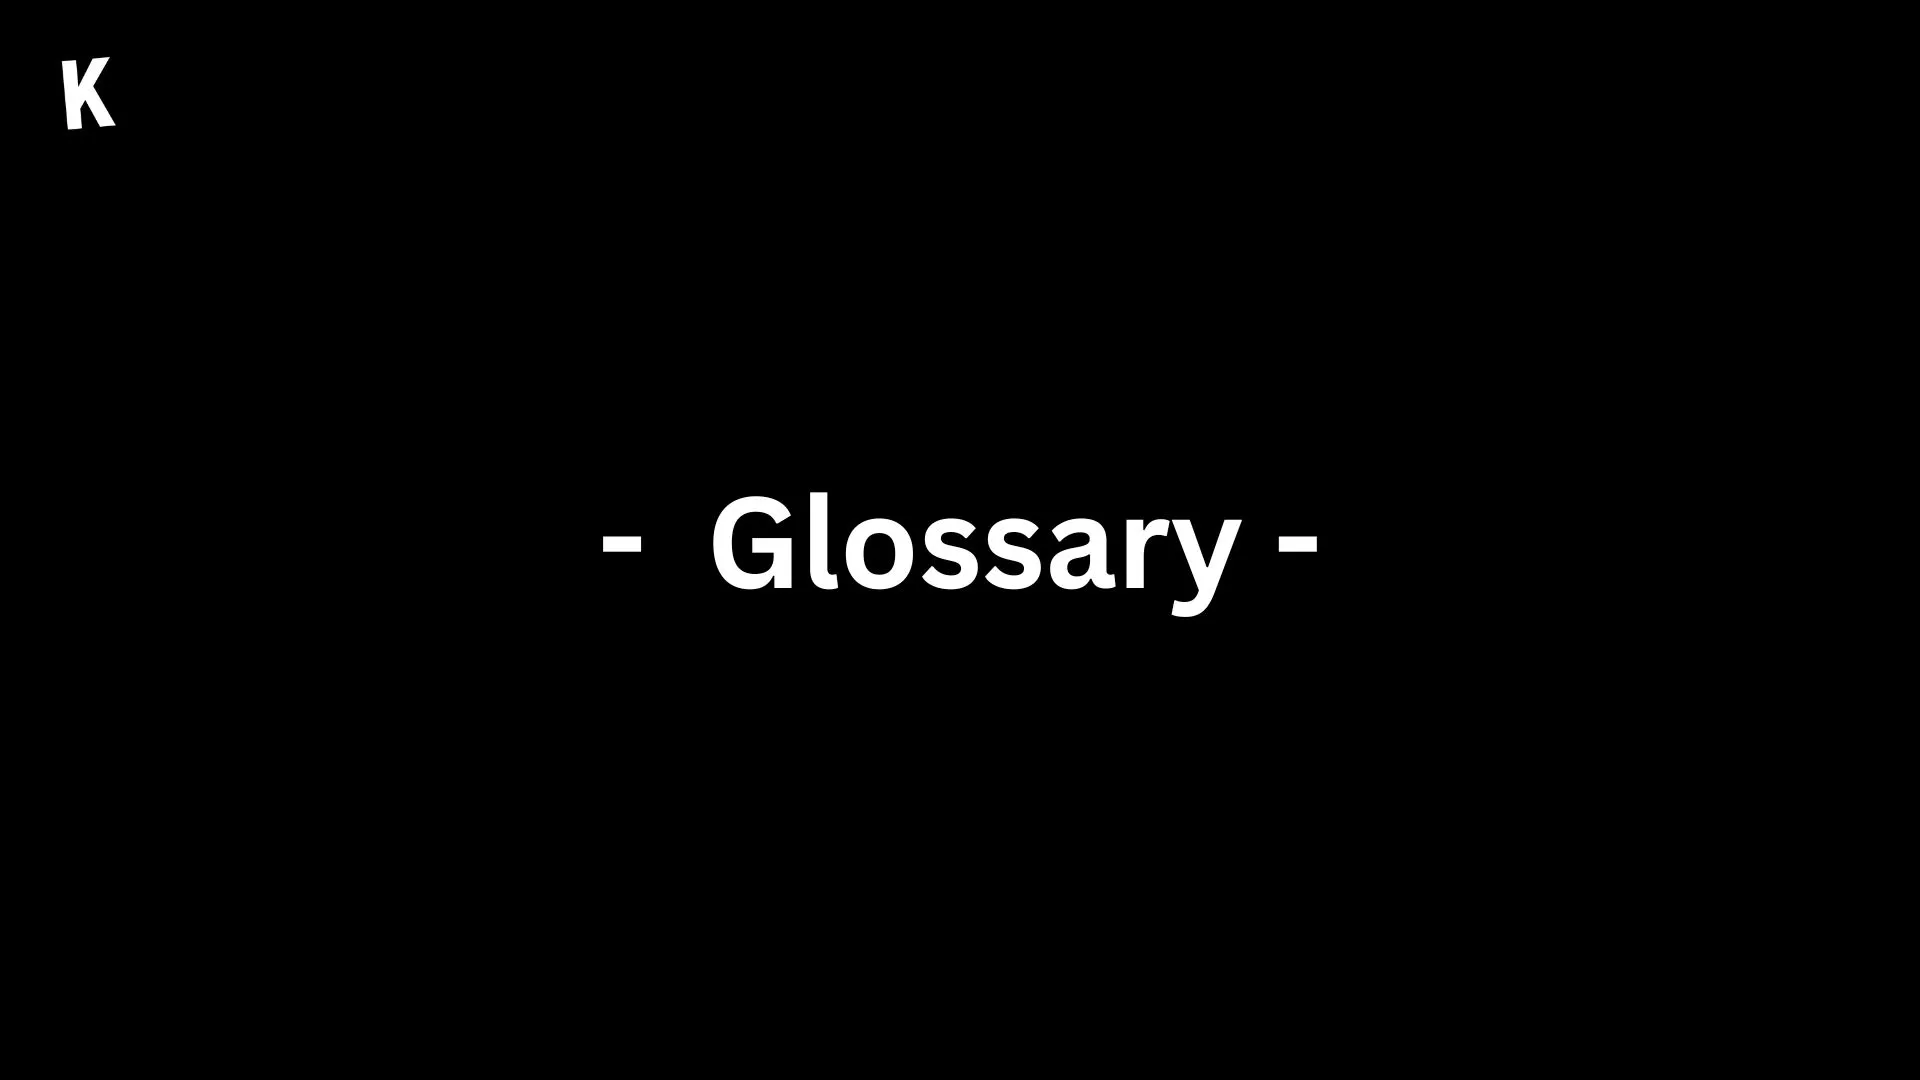 Glossary banner for the encyclopedia